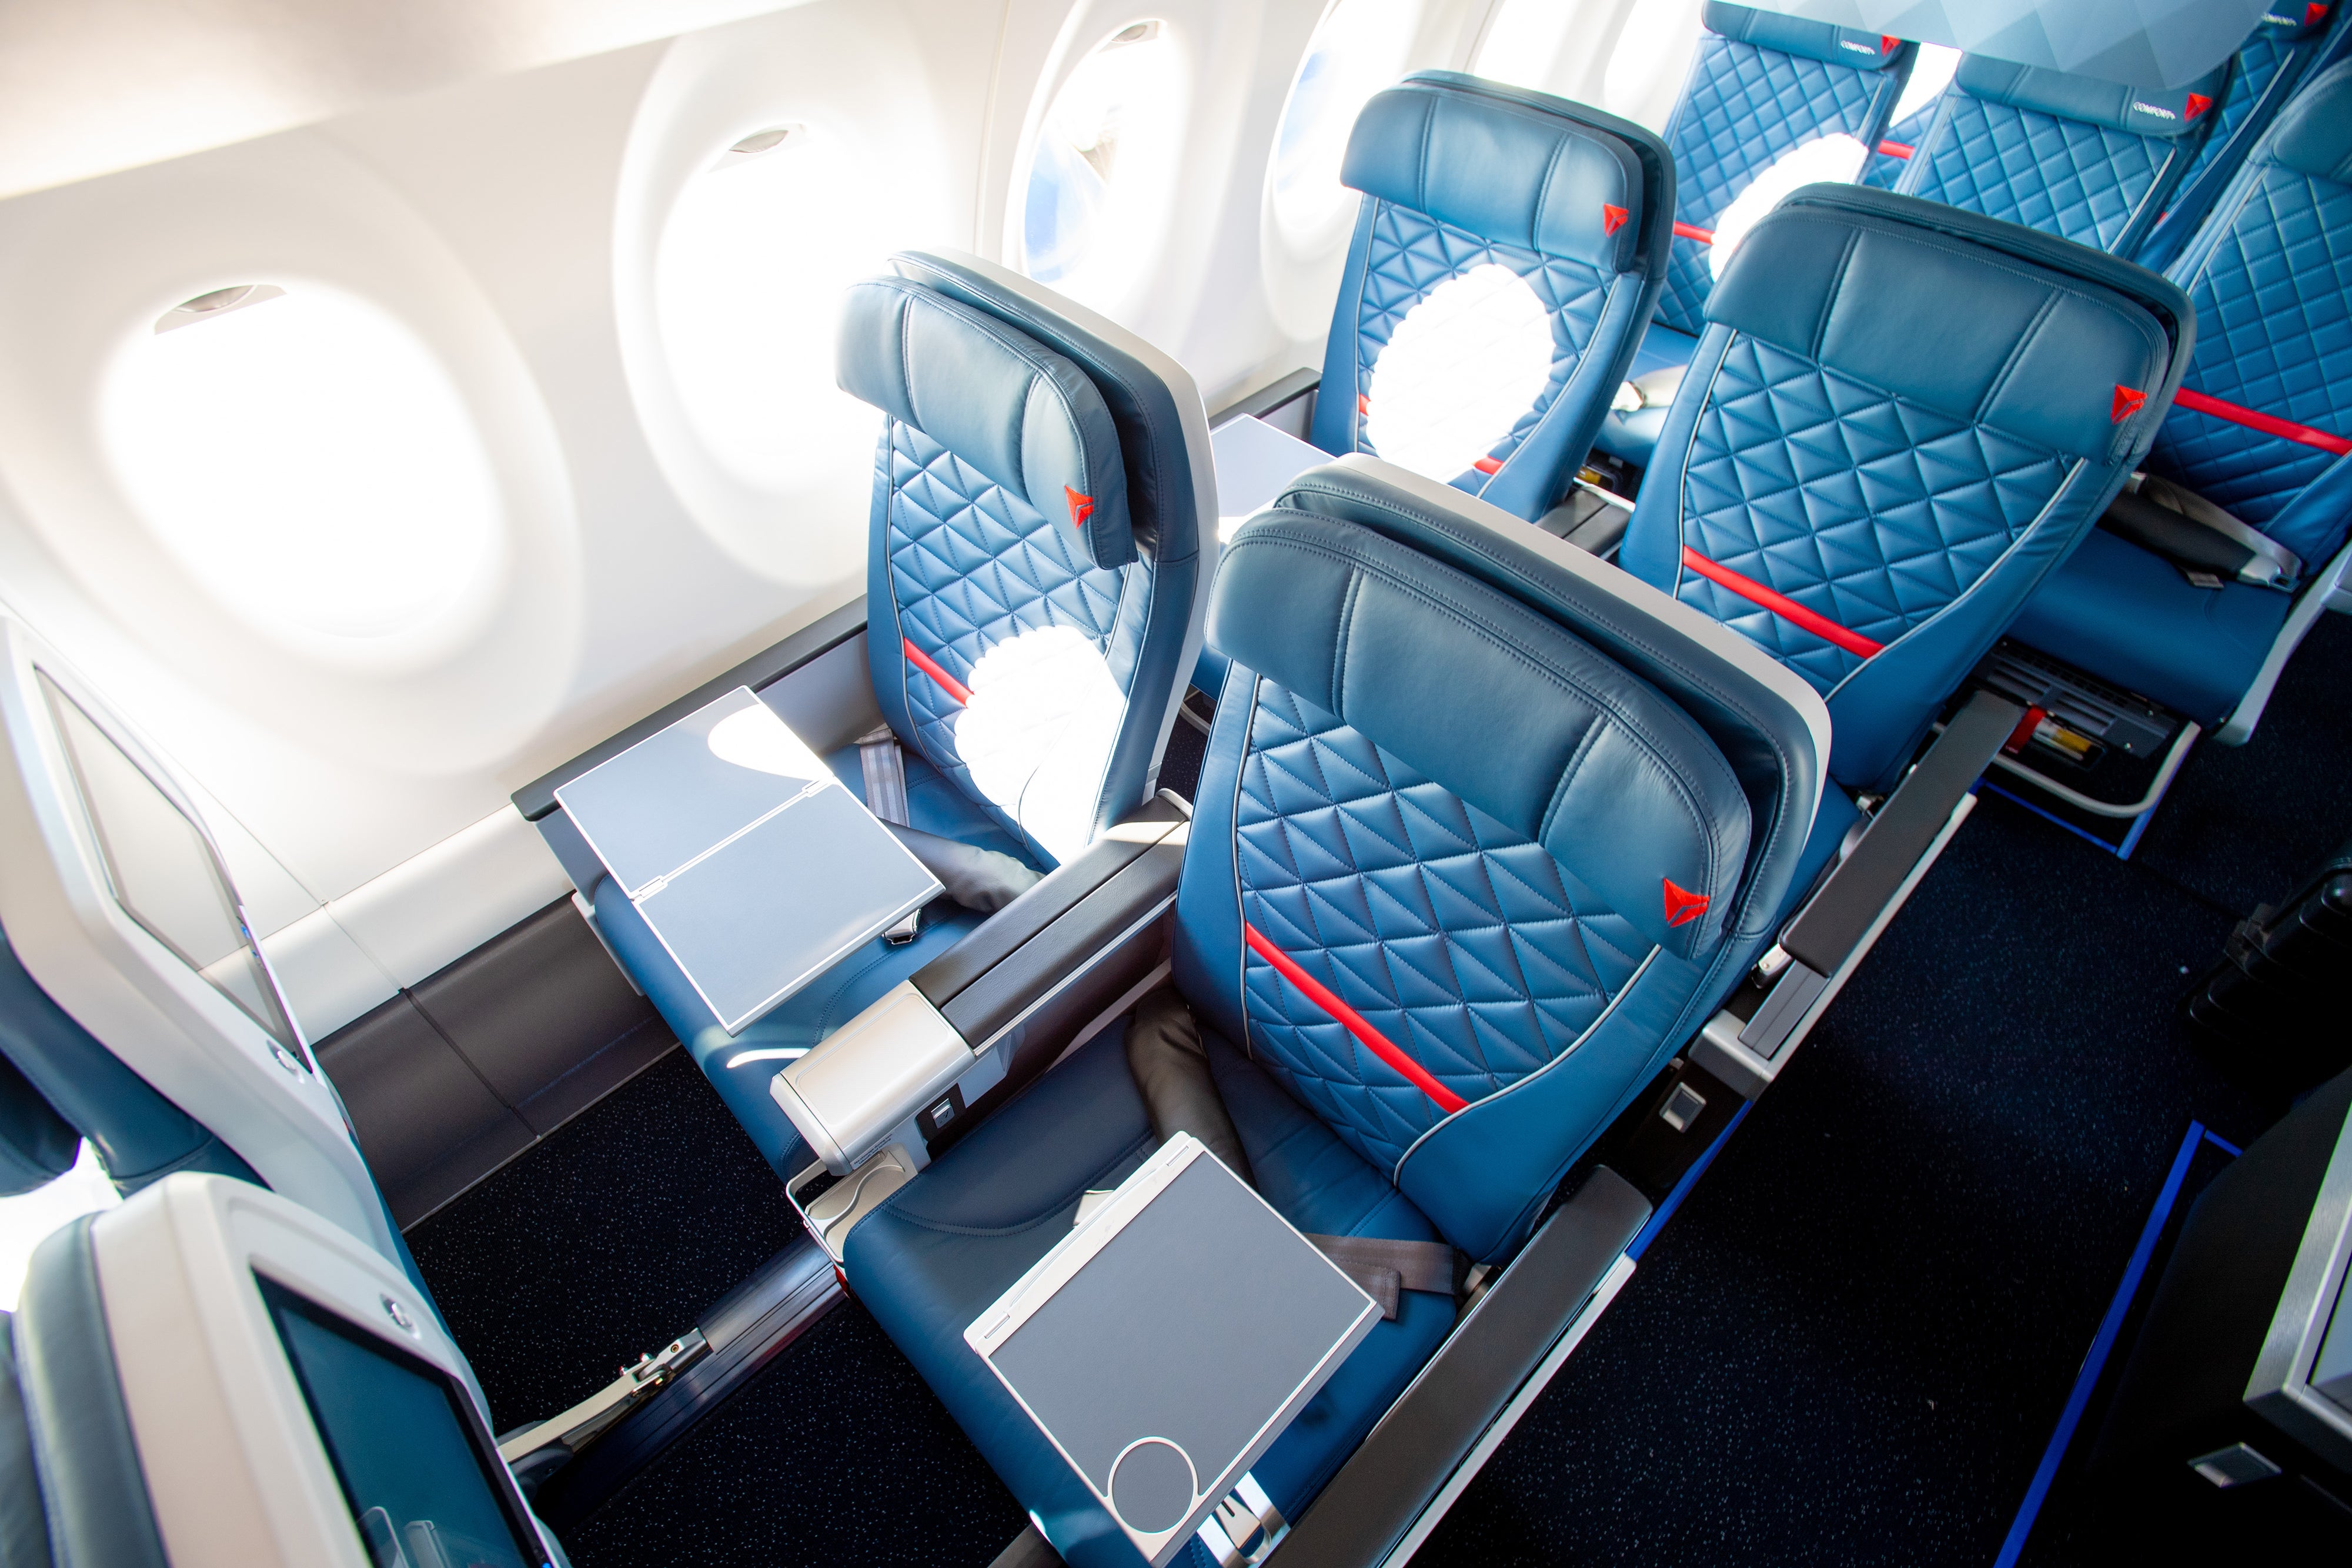 Delta flash sale: First class tickets from $172 one-way